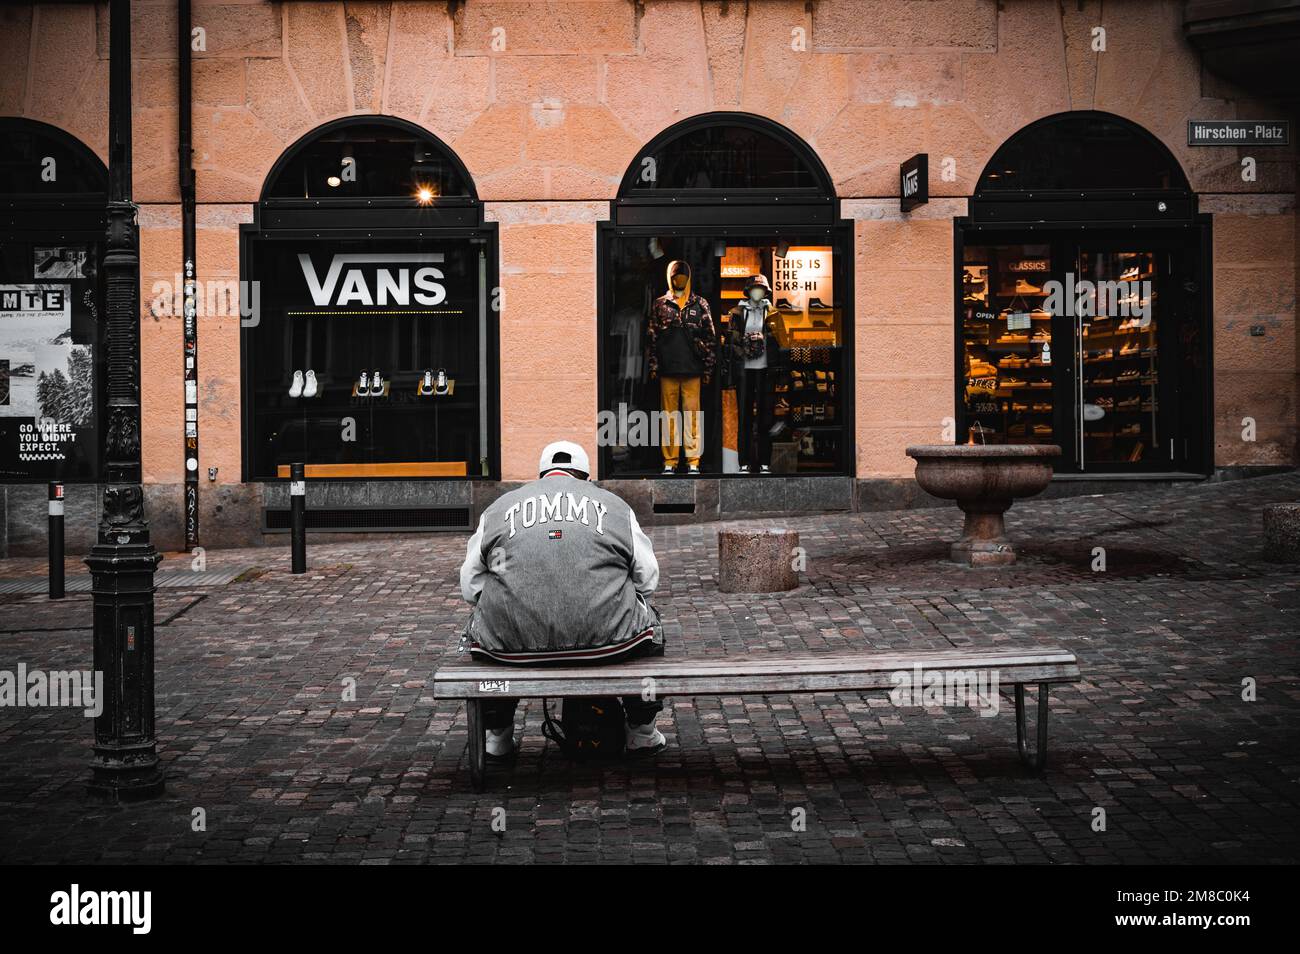 A man sitting on a bench against the "Vans" store in Zurich Stock Photo -  Alamy